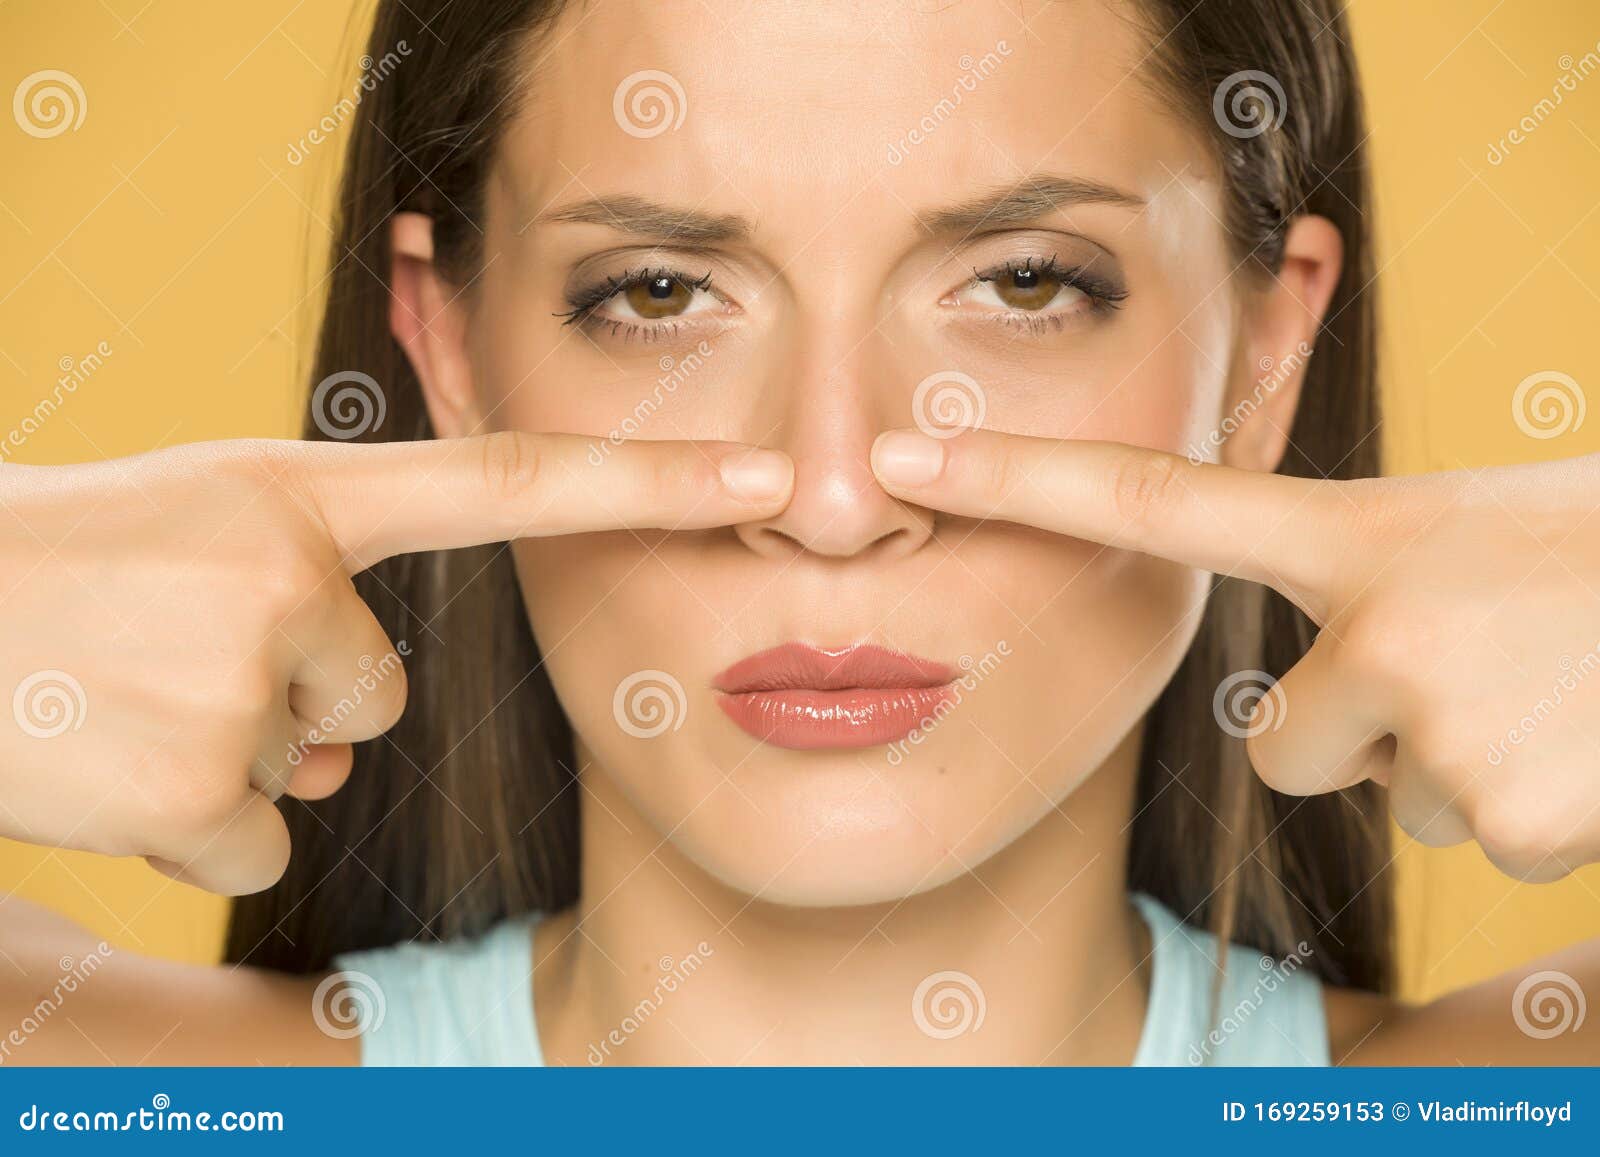 beautiful young woman touching her nose with her fingers